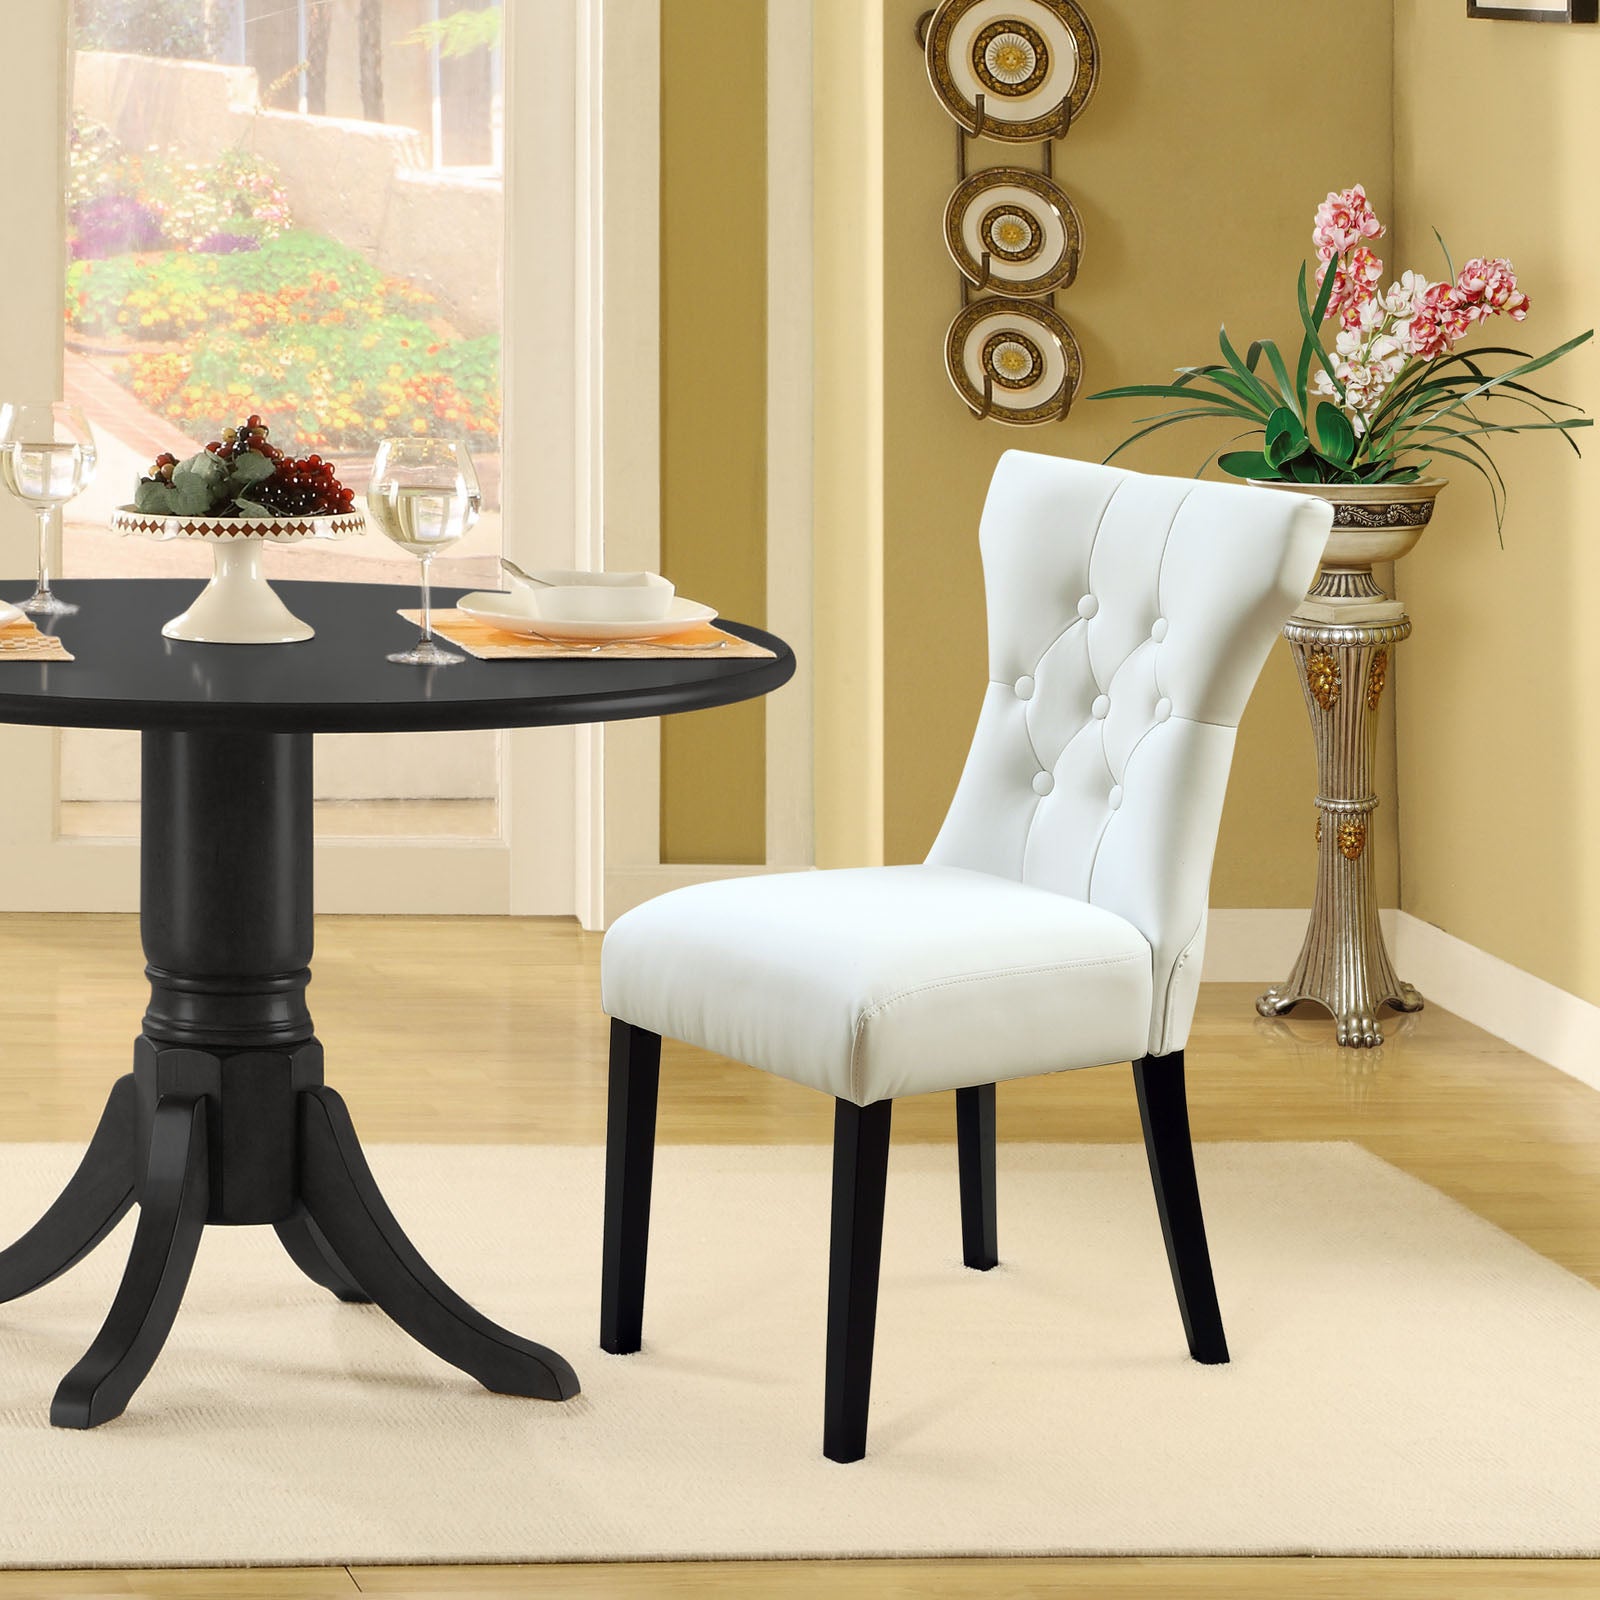 Modway Dining Chairs - Silhouette Dining Chairs Set of 2 White